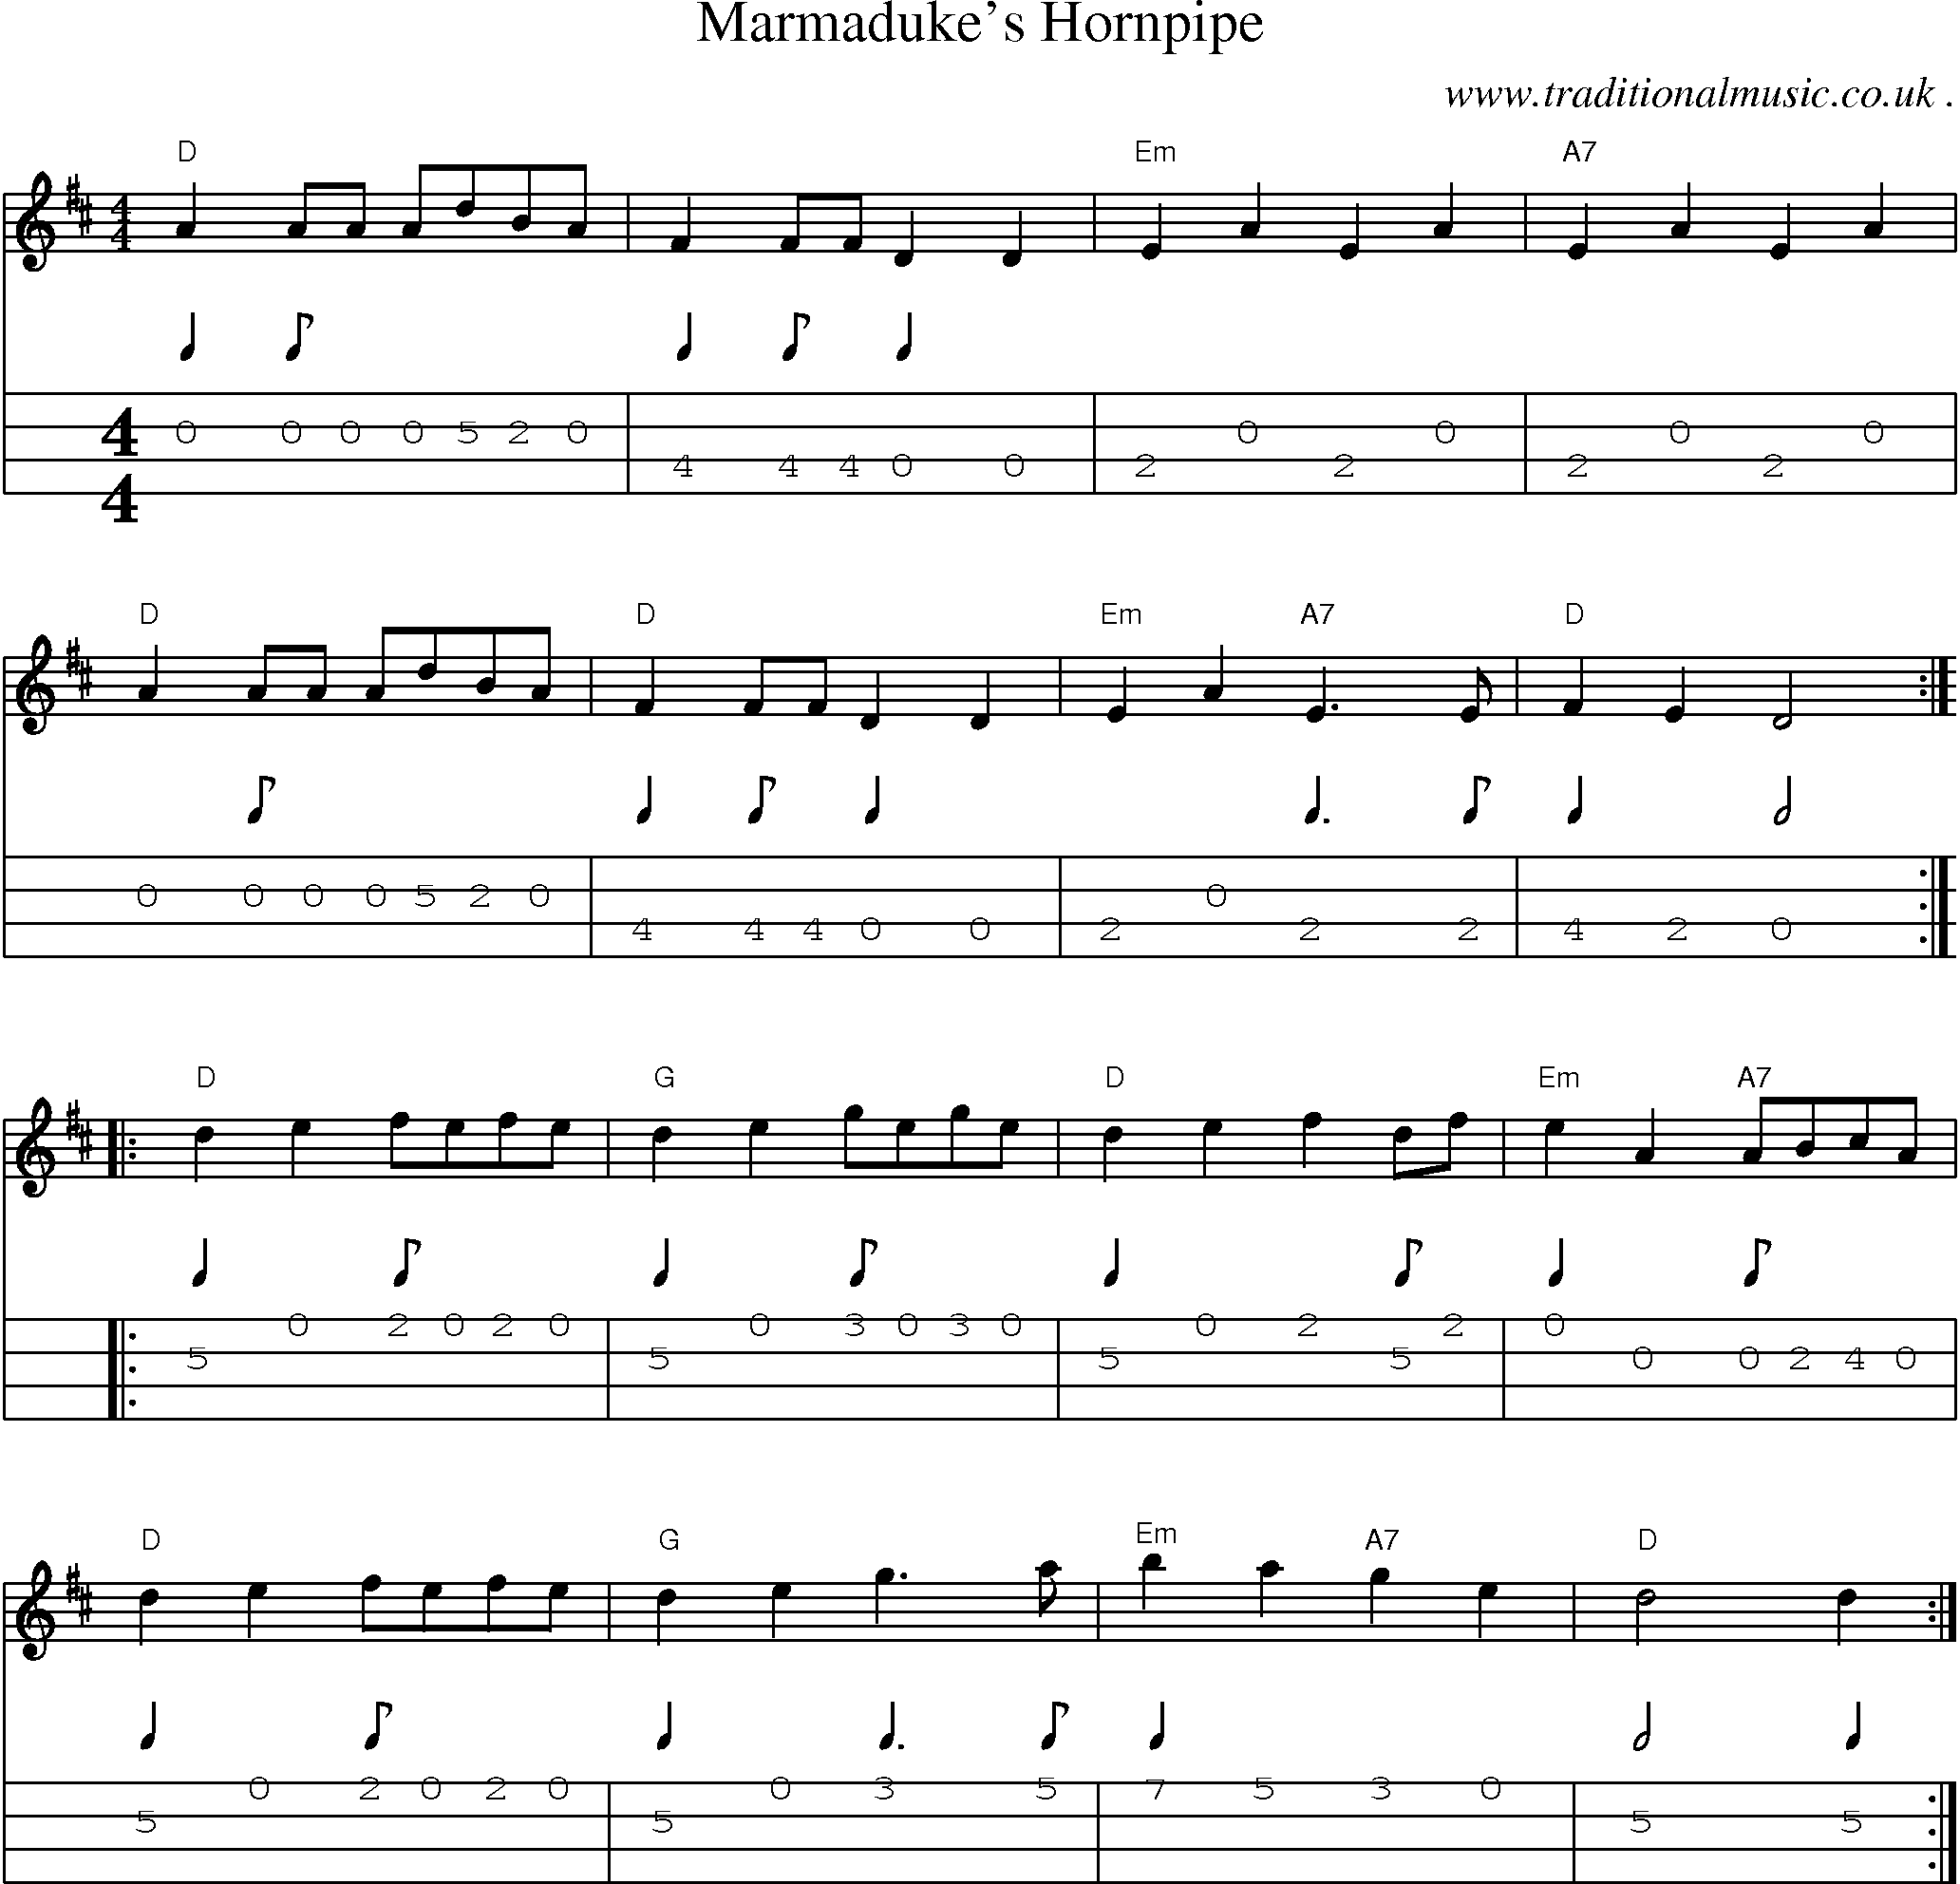 Sheet-Music and Mandolin Tabs for Marmadukes Hornpipe